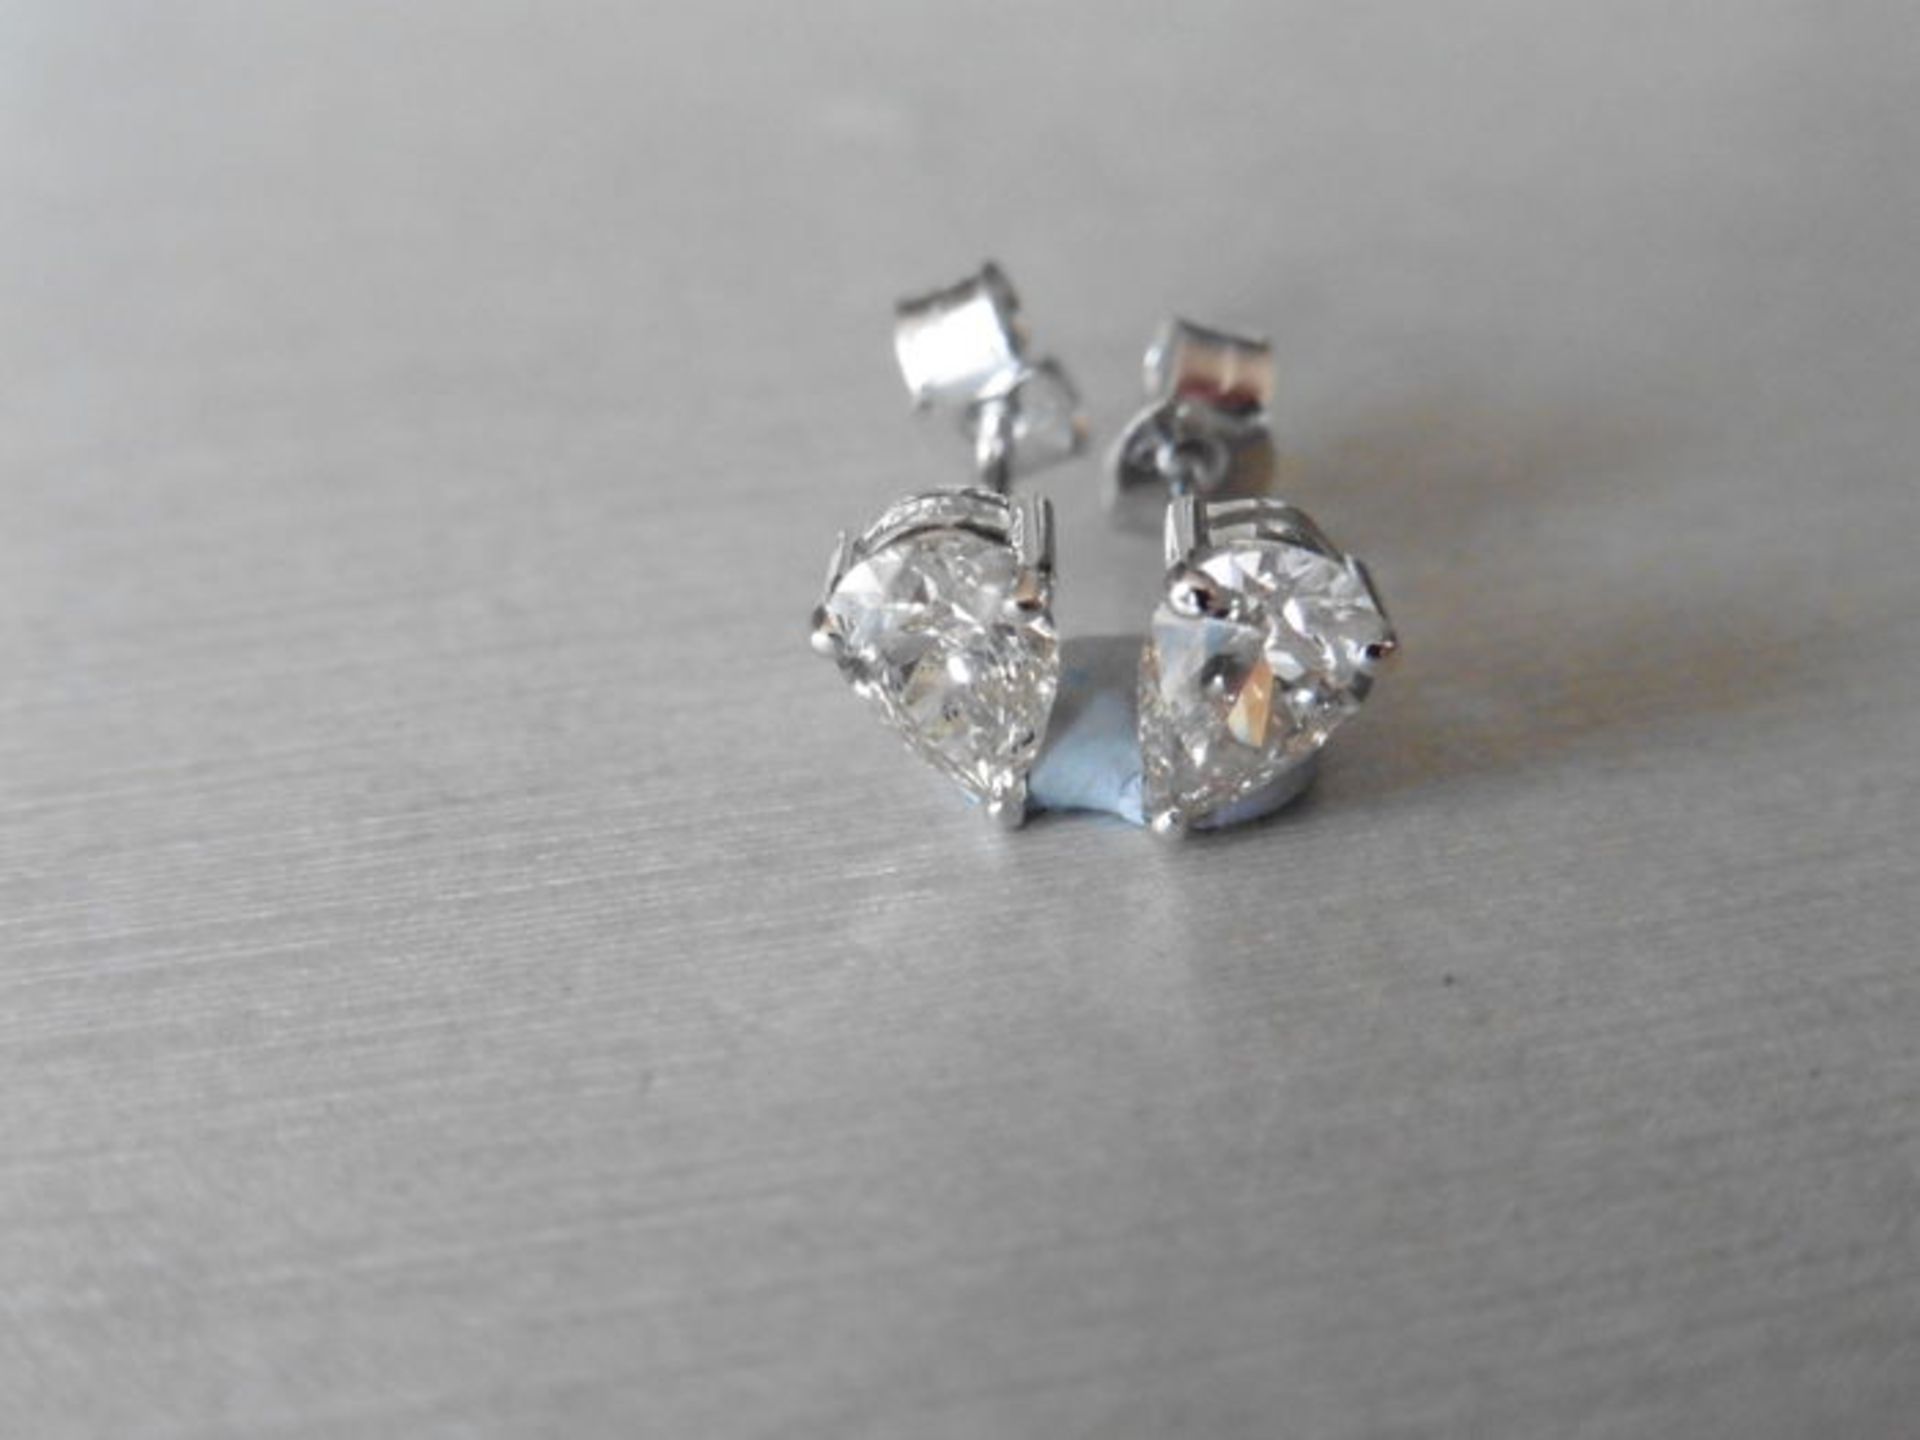 0.70ct diamond earrings set with pear shaped diamonds, I/J colour, si2 clarity. 3 claw setting in